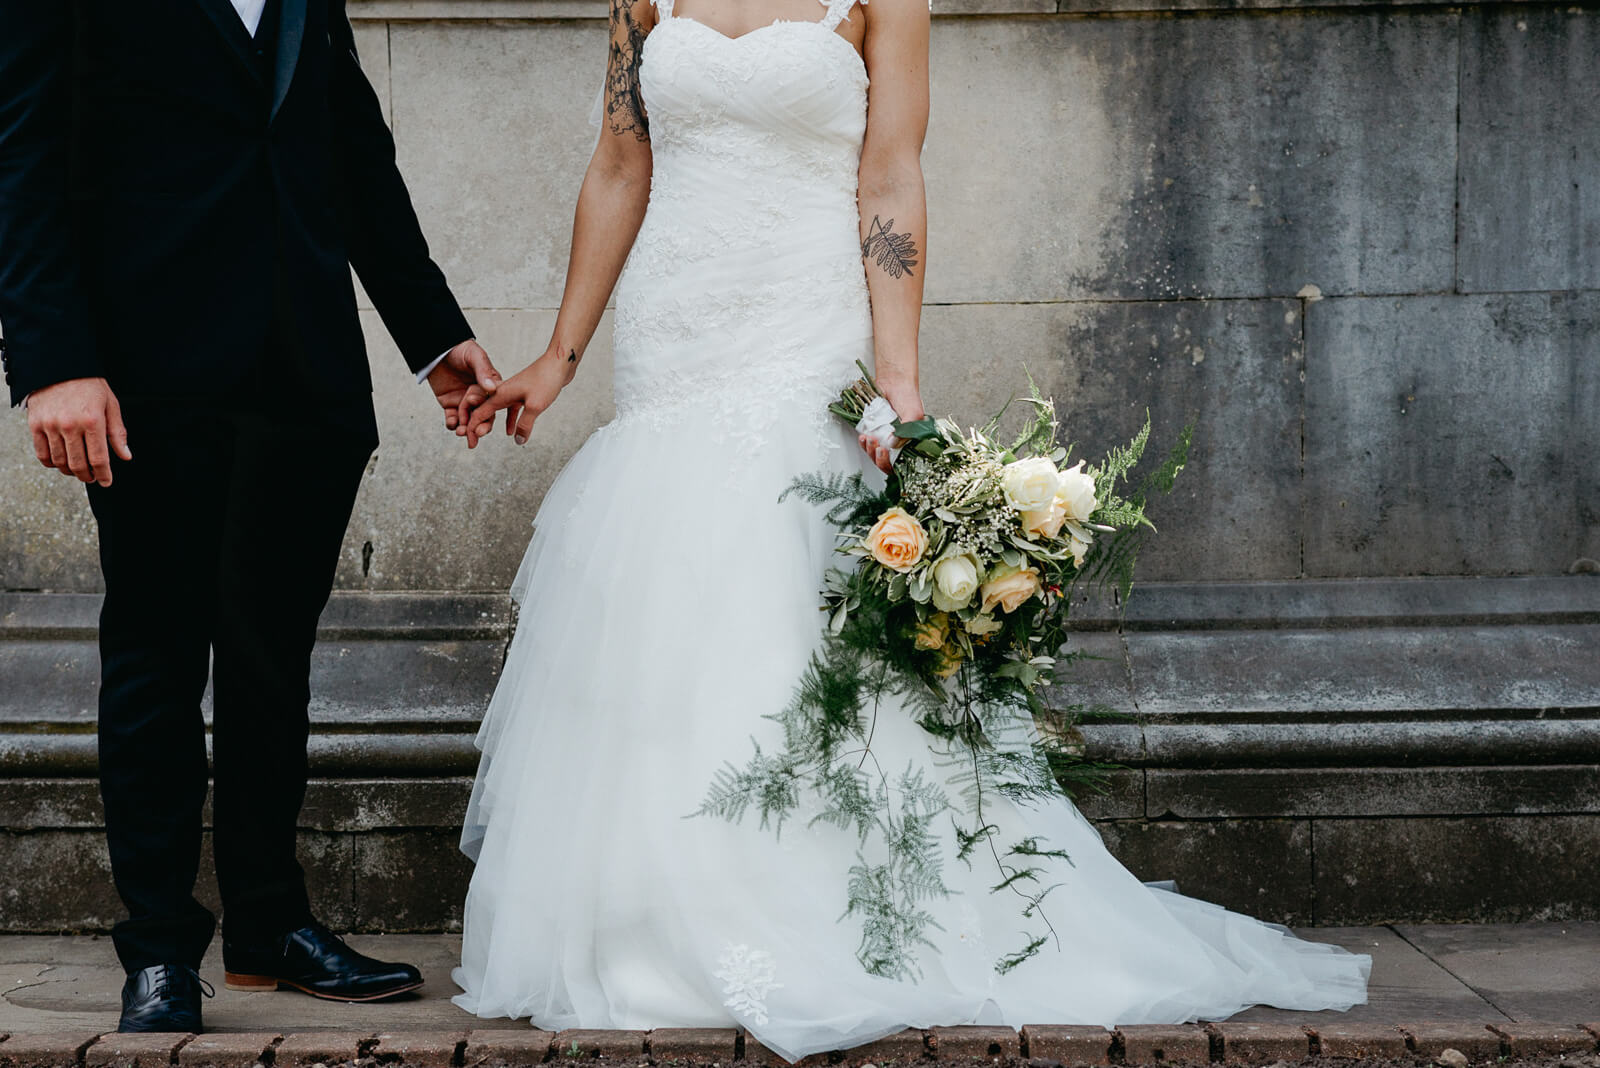 alternative photo of bride and groom holding hands and her bouquet after their city wedding